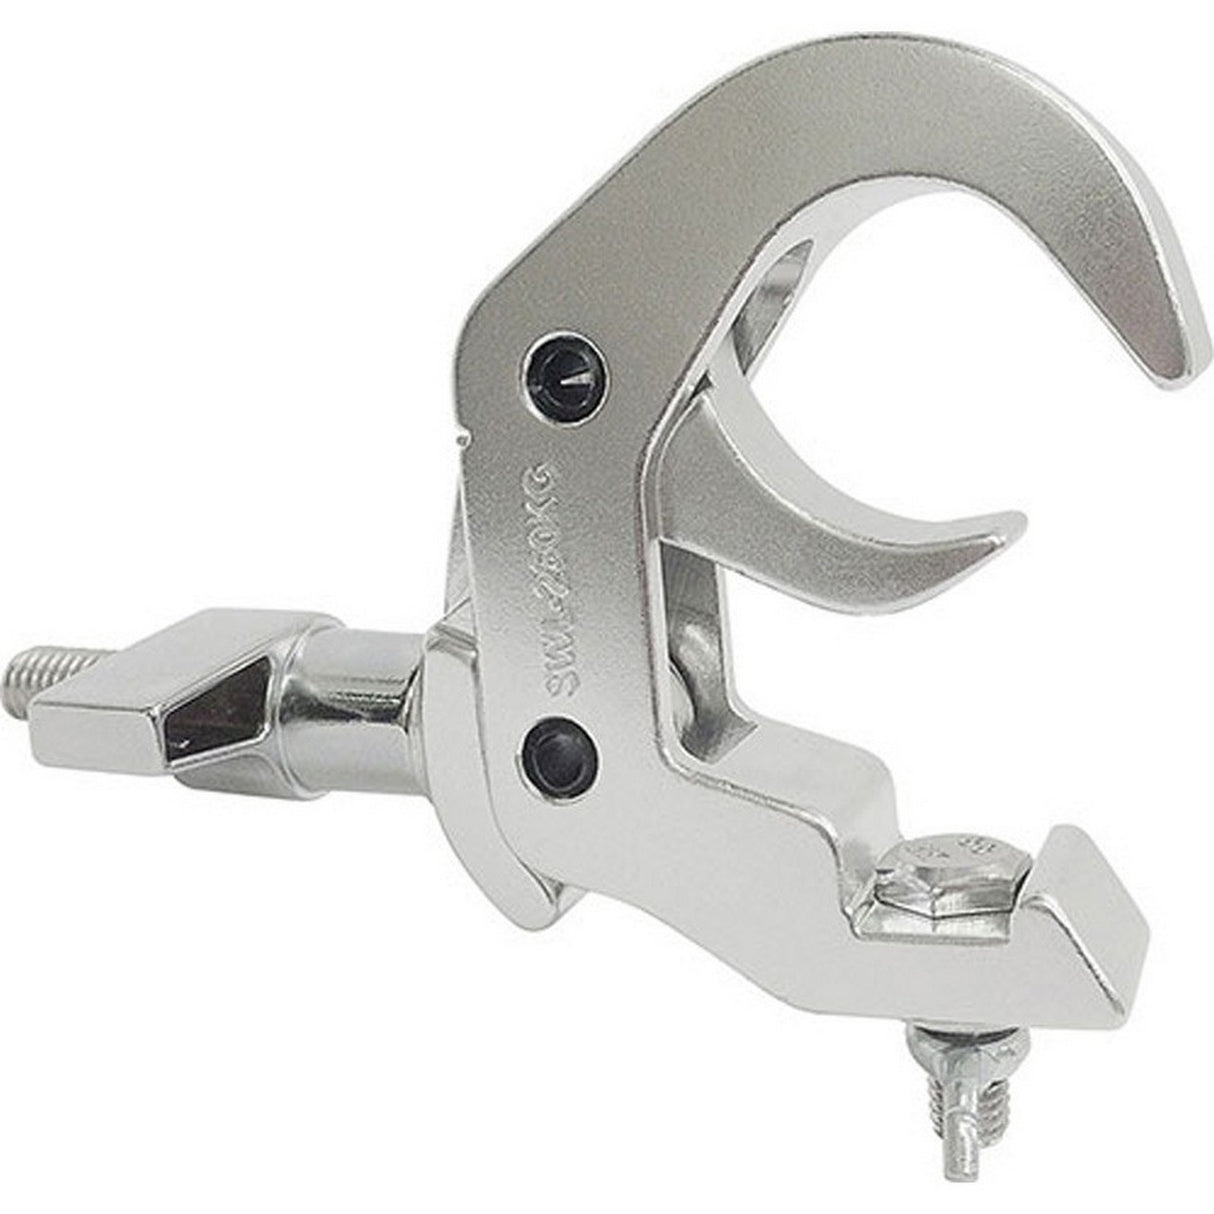 ADJ QUICK RIG CLAMP | Heavy Duty 50mm Hook Style Clamp